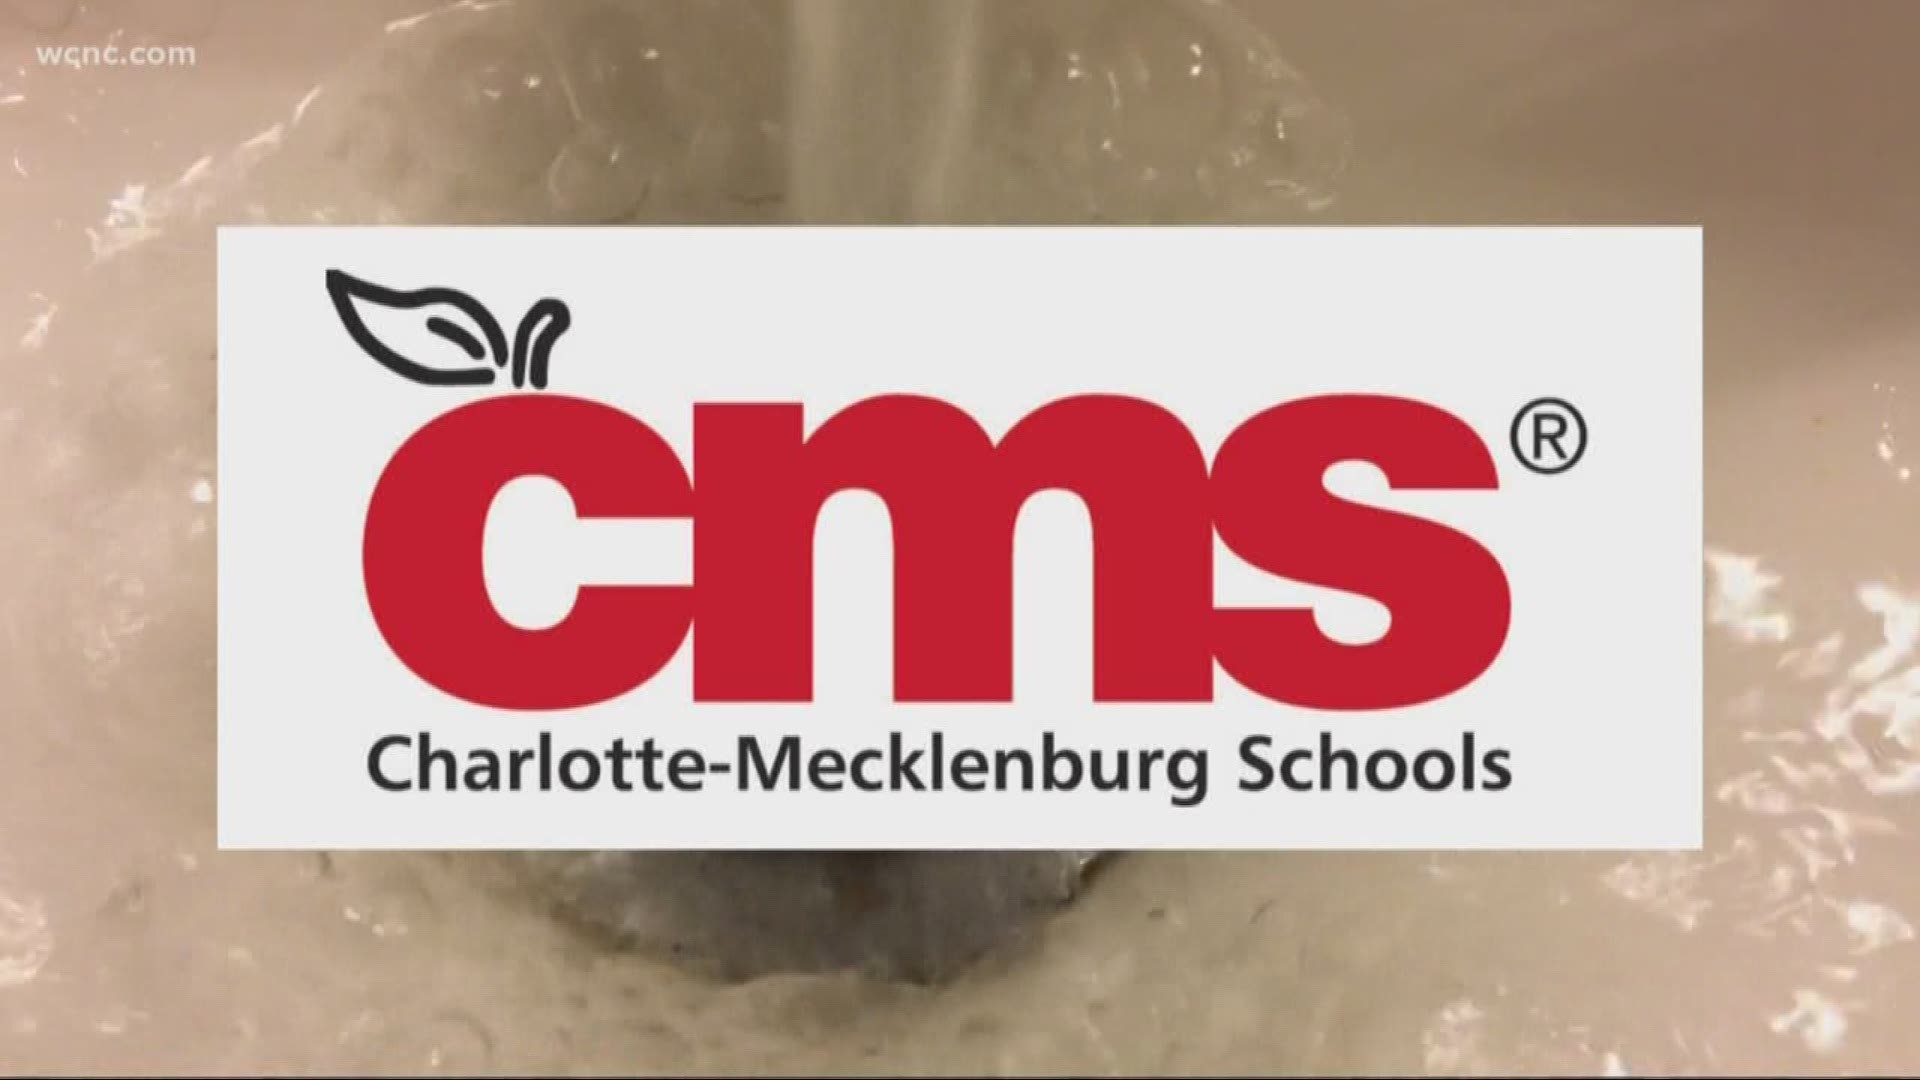 CMS began testing 32 schools today for high levels of lead found in water coming from water fixtures at the schools.